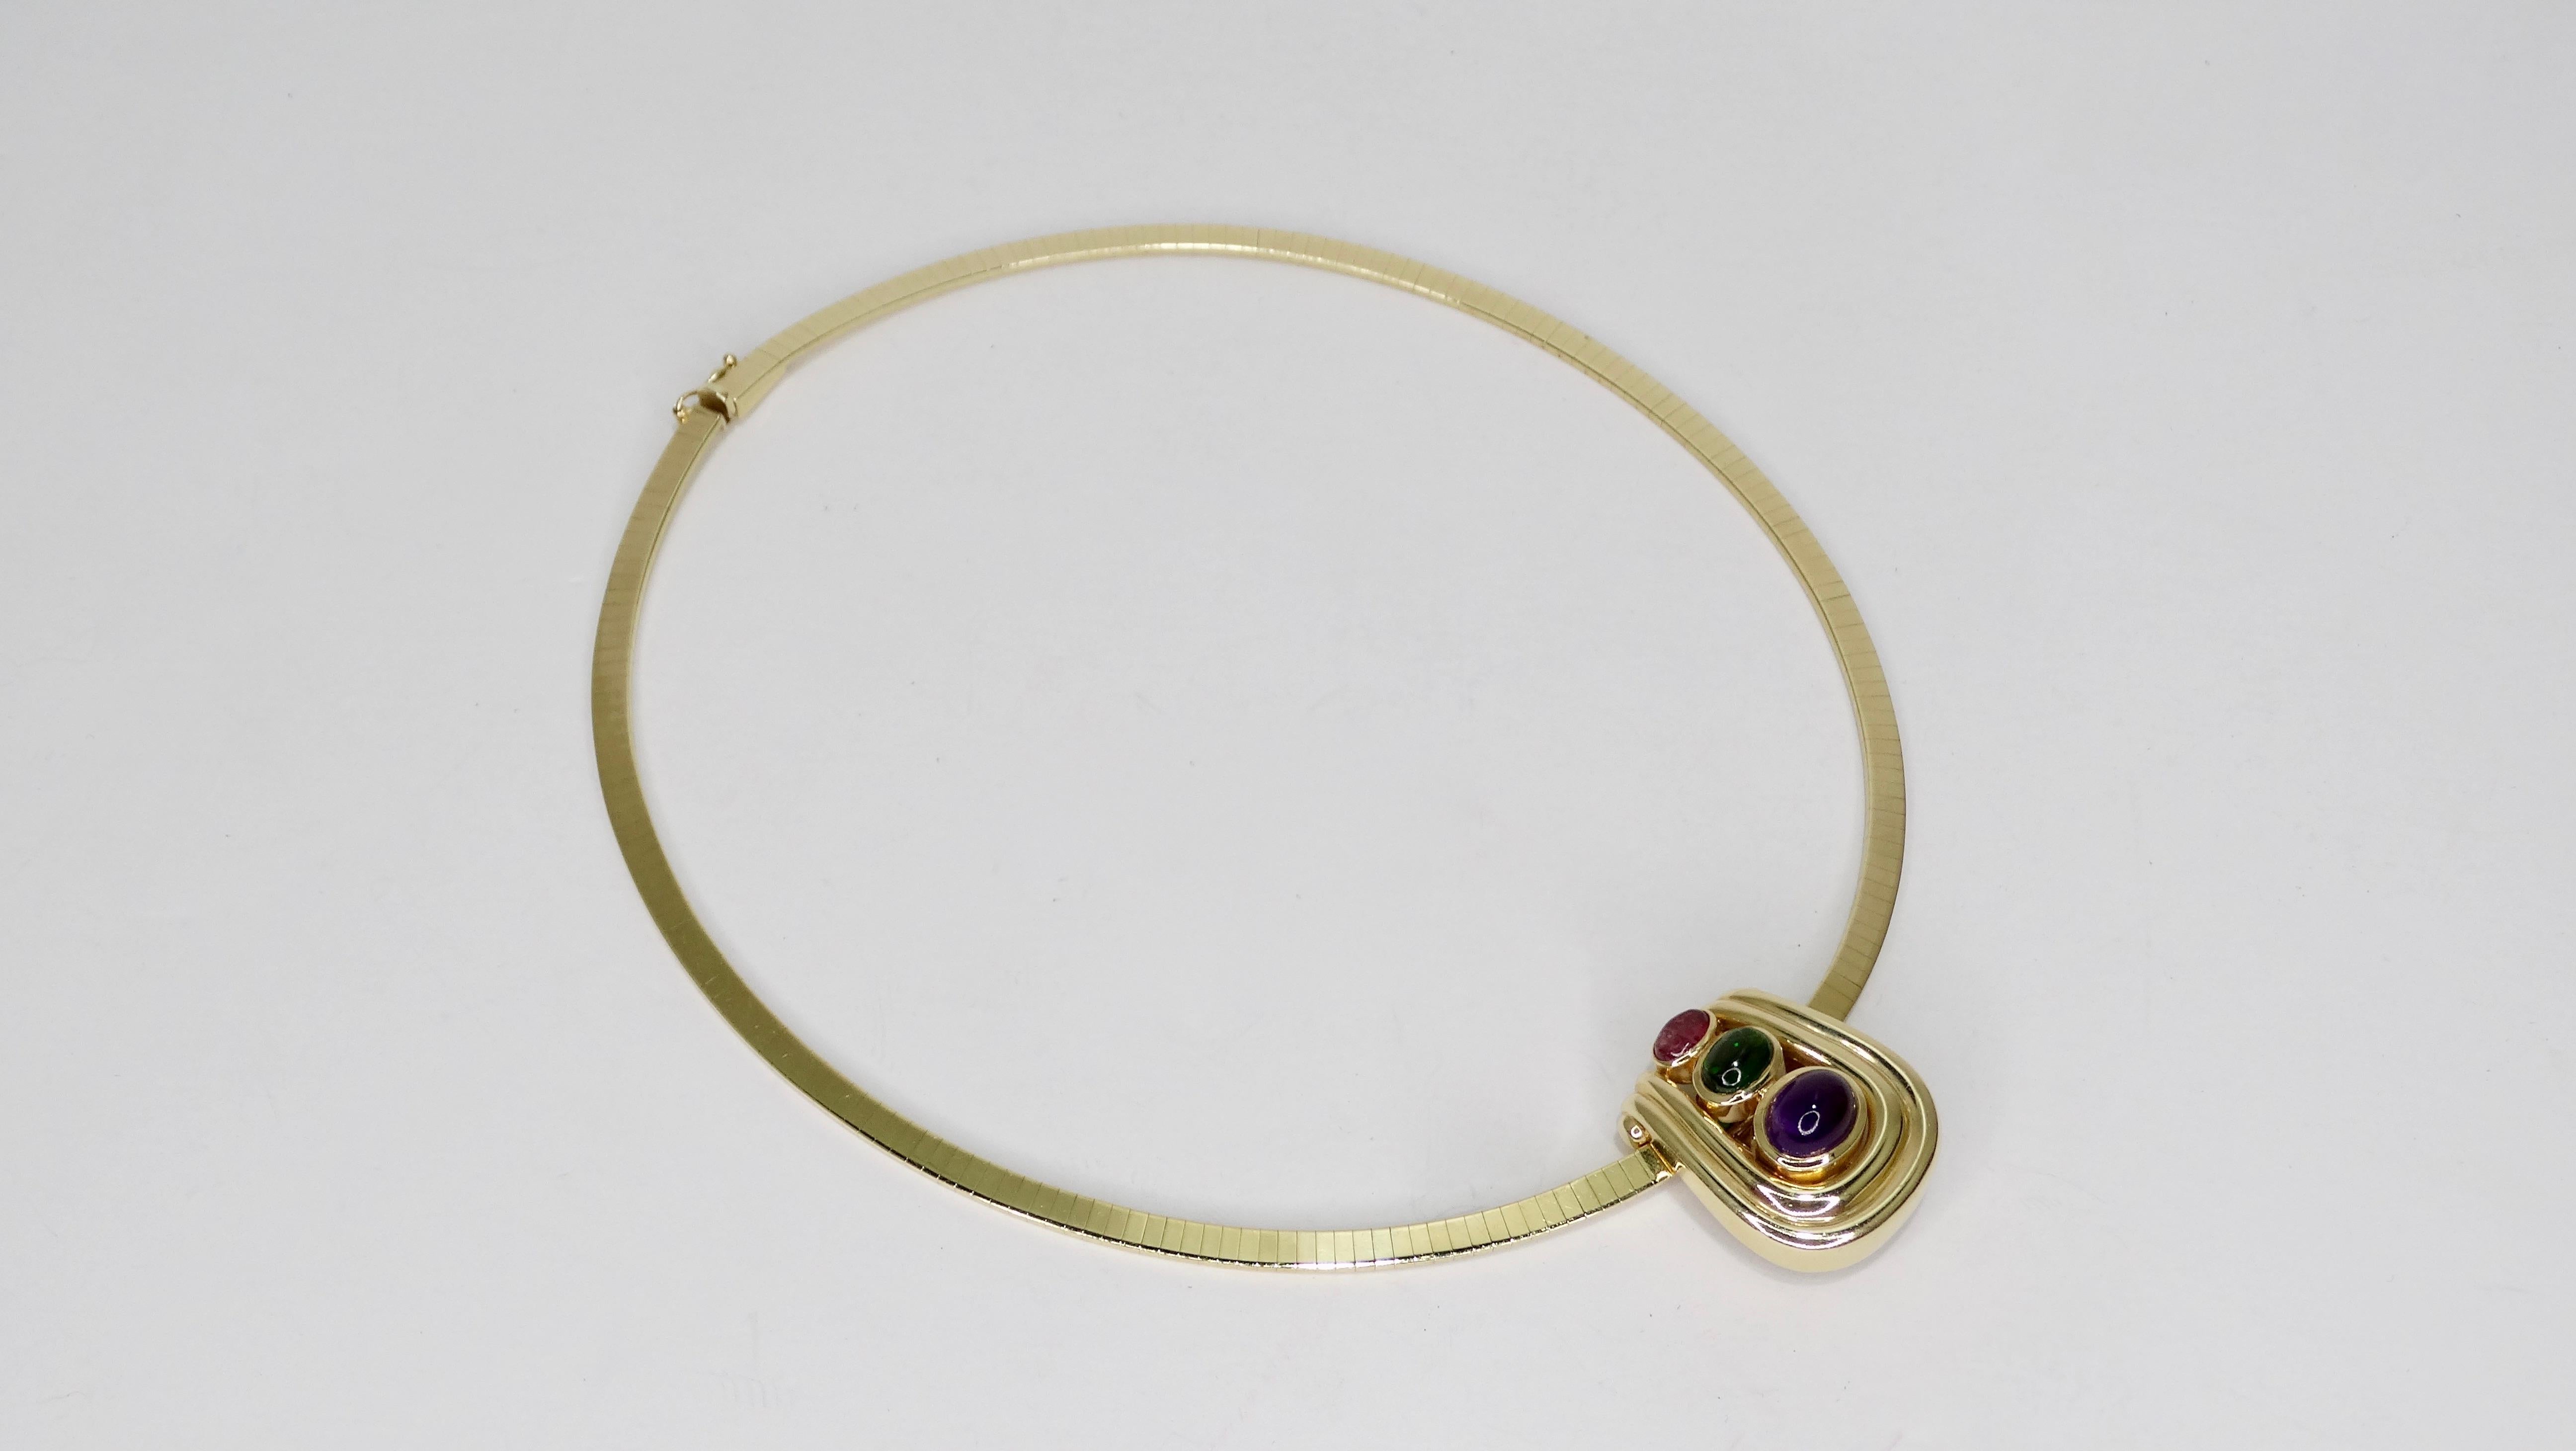 Beautiful 14k Gold choker necklace with a removable pendant that features Cabochon cut Amethyst, Pink Tourmaline and Green Tourmaline. 38.09g in total weight. Pair with your favorite vintage Missoni kaftan or slick black Yves Saint Laurent evening